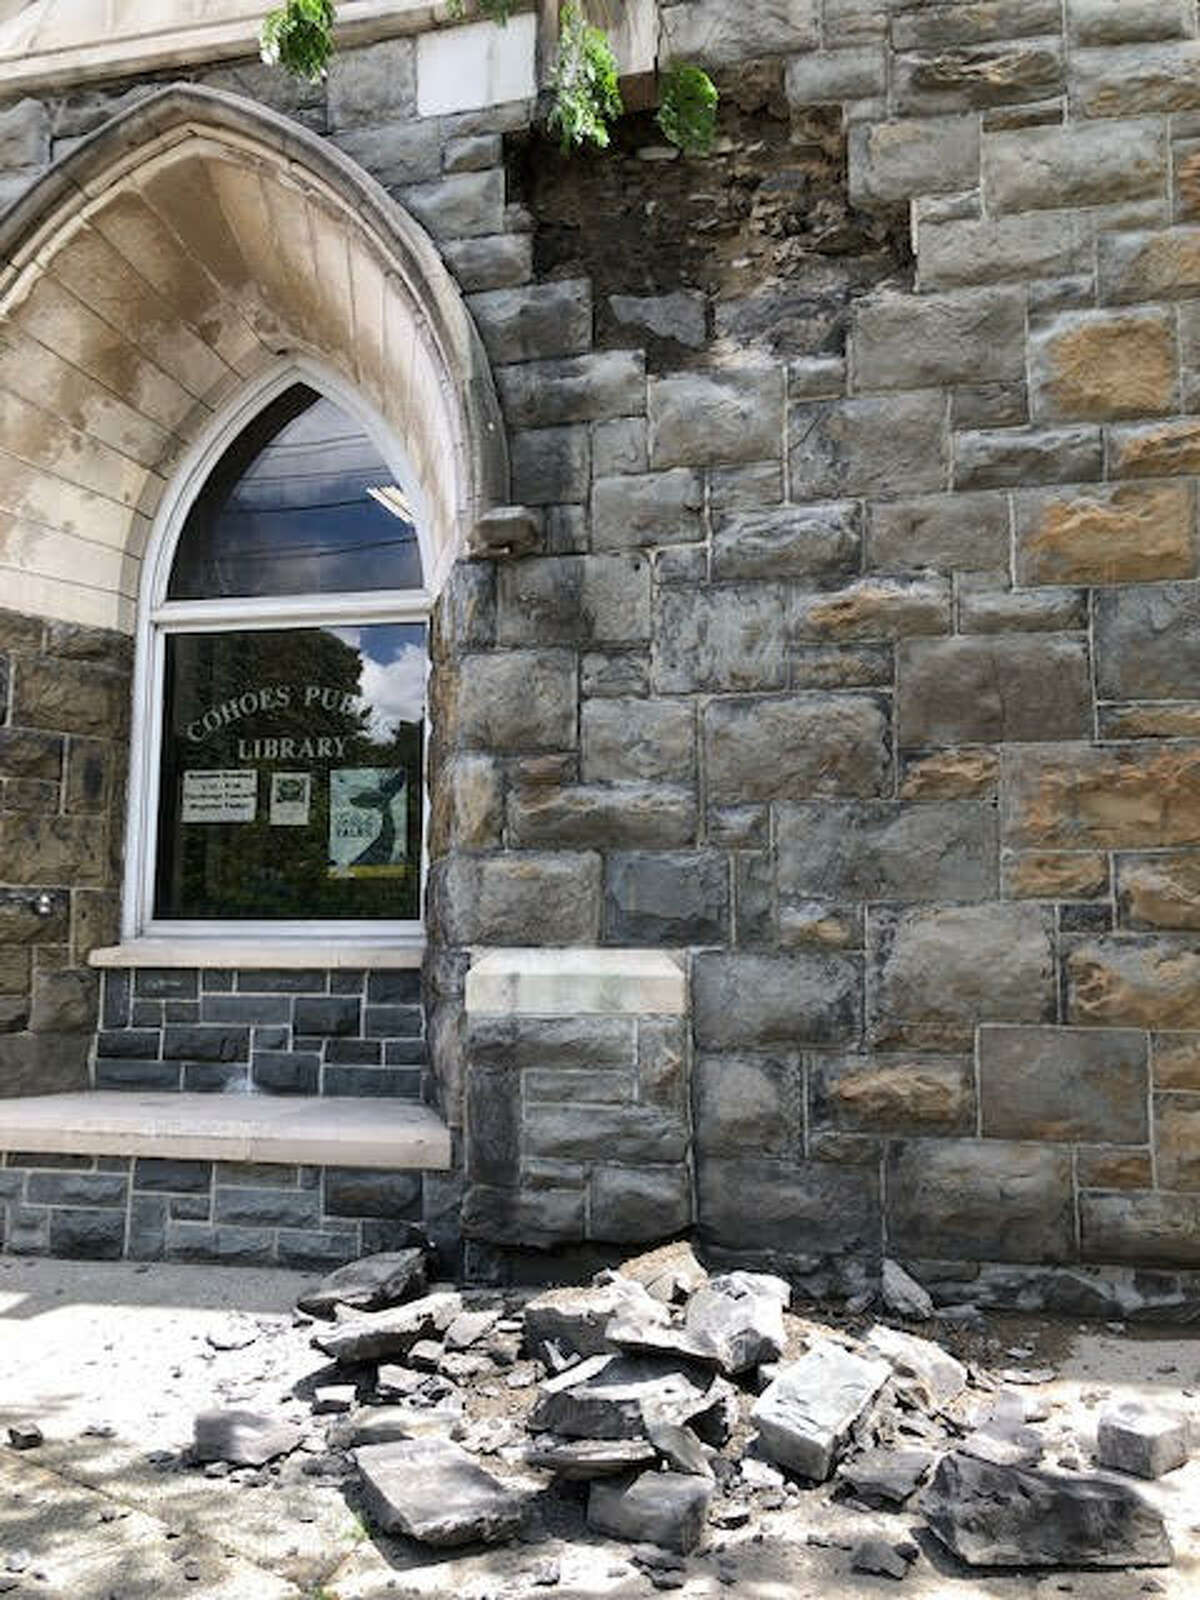 A portion of an exterior wall at the Cohoes Publc Library has collapsed. City officials said a subsequent assessment of the building as "shown other worrisome areas."